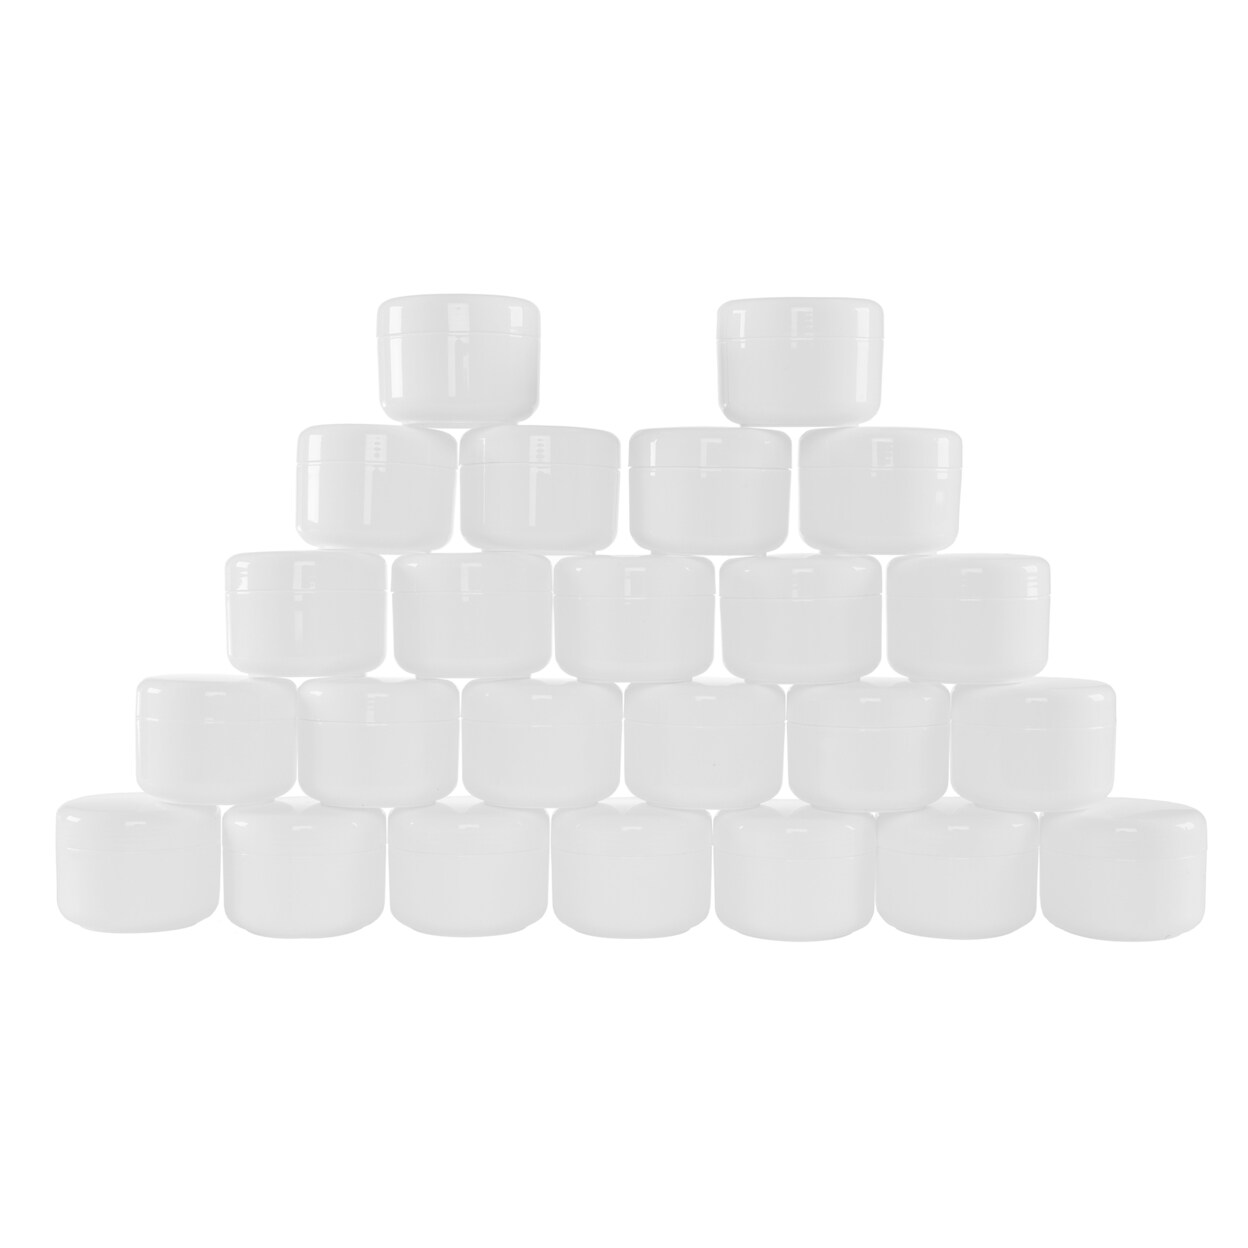 Stalwart White 4 Ounce Plastic Jar Containers 24 Pack of Storage Jars Inner and Outer Lid By  - For Travel Cosmetic Liquid